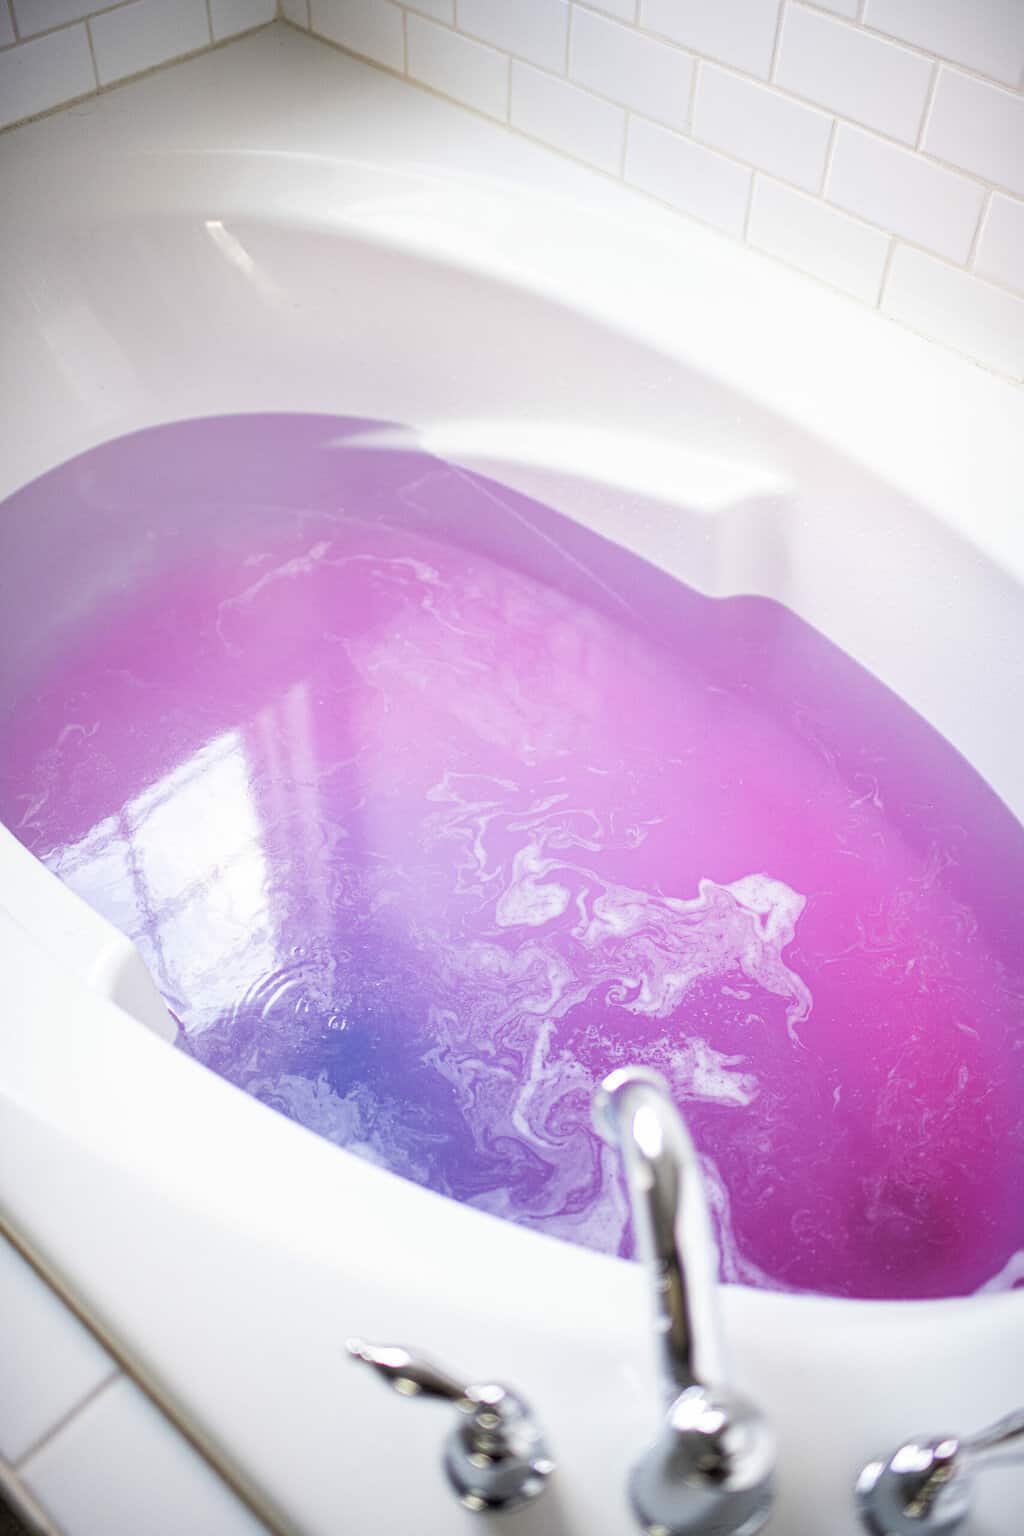 How to use a bath bomb the right way